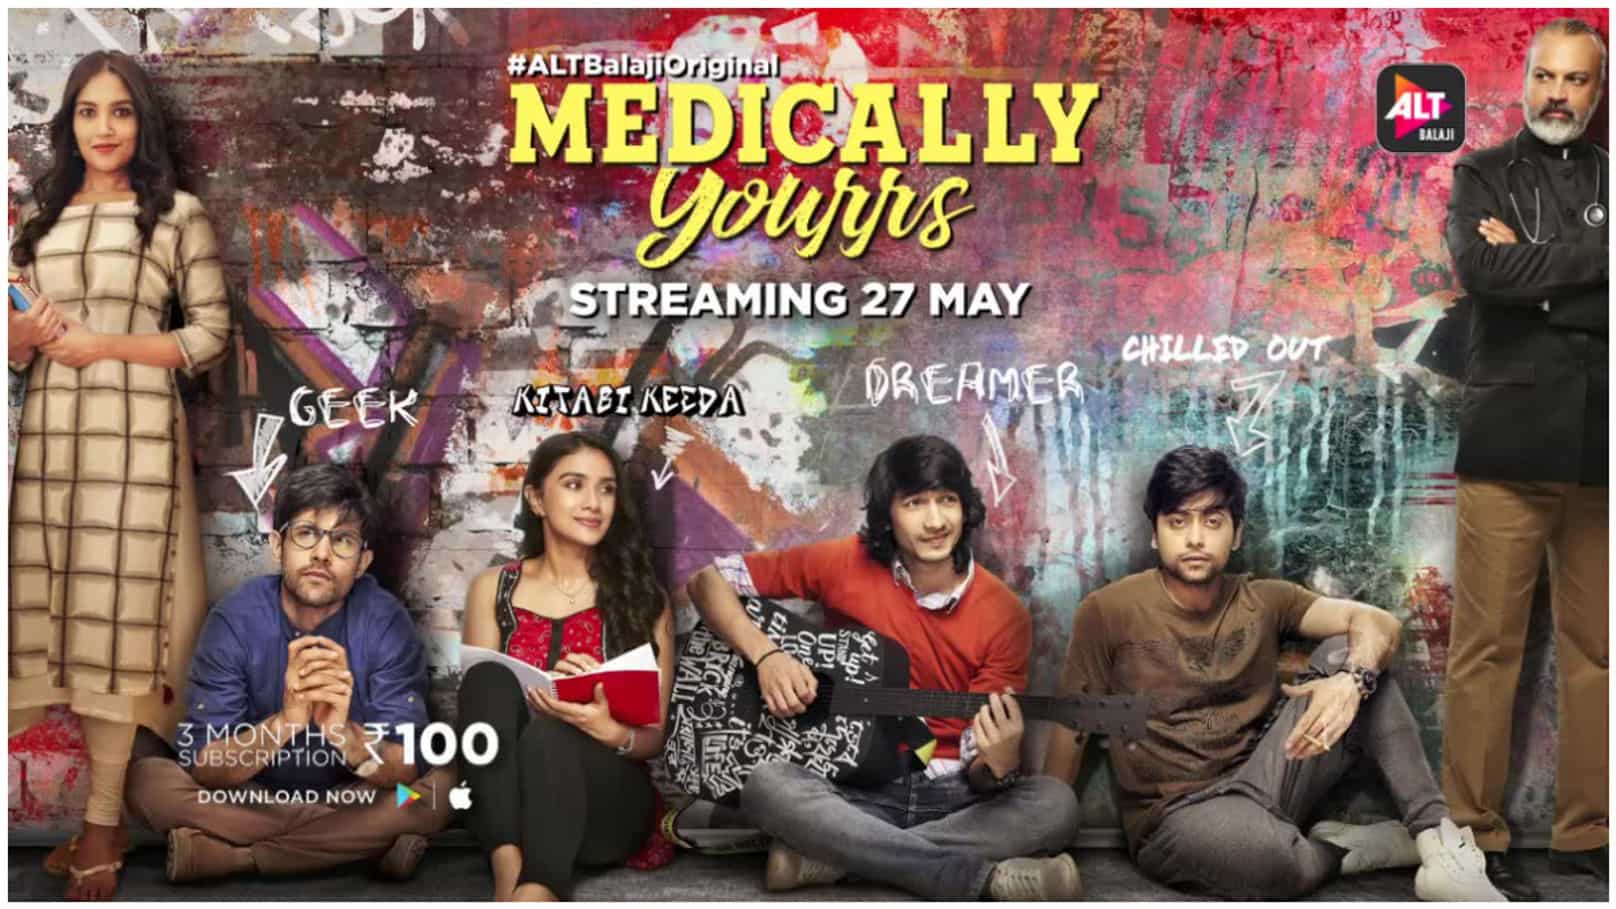 https://www.mobilemasala.com/movies/Revisit-Medically-Yourrs-on-ALTT-i276657